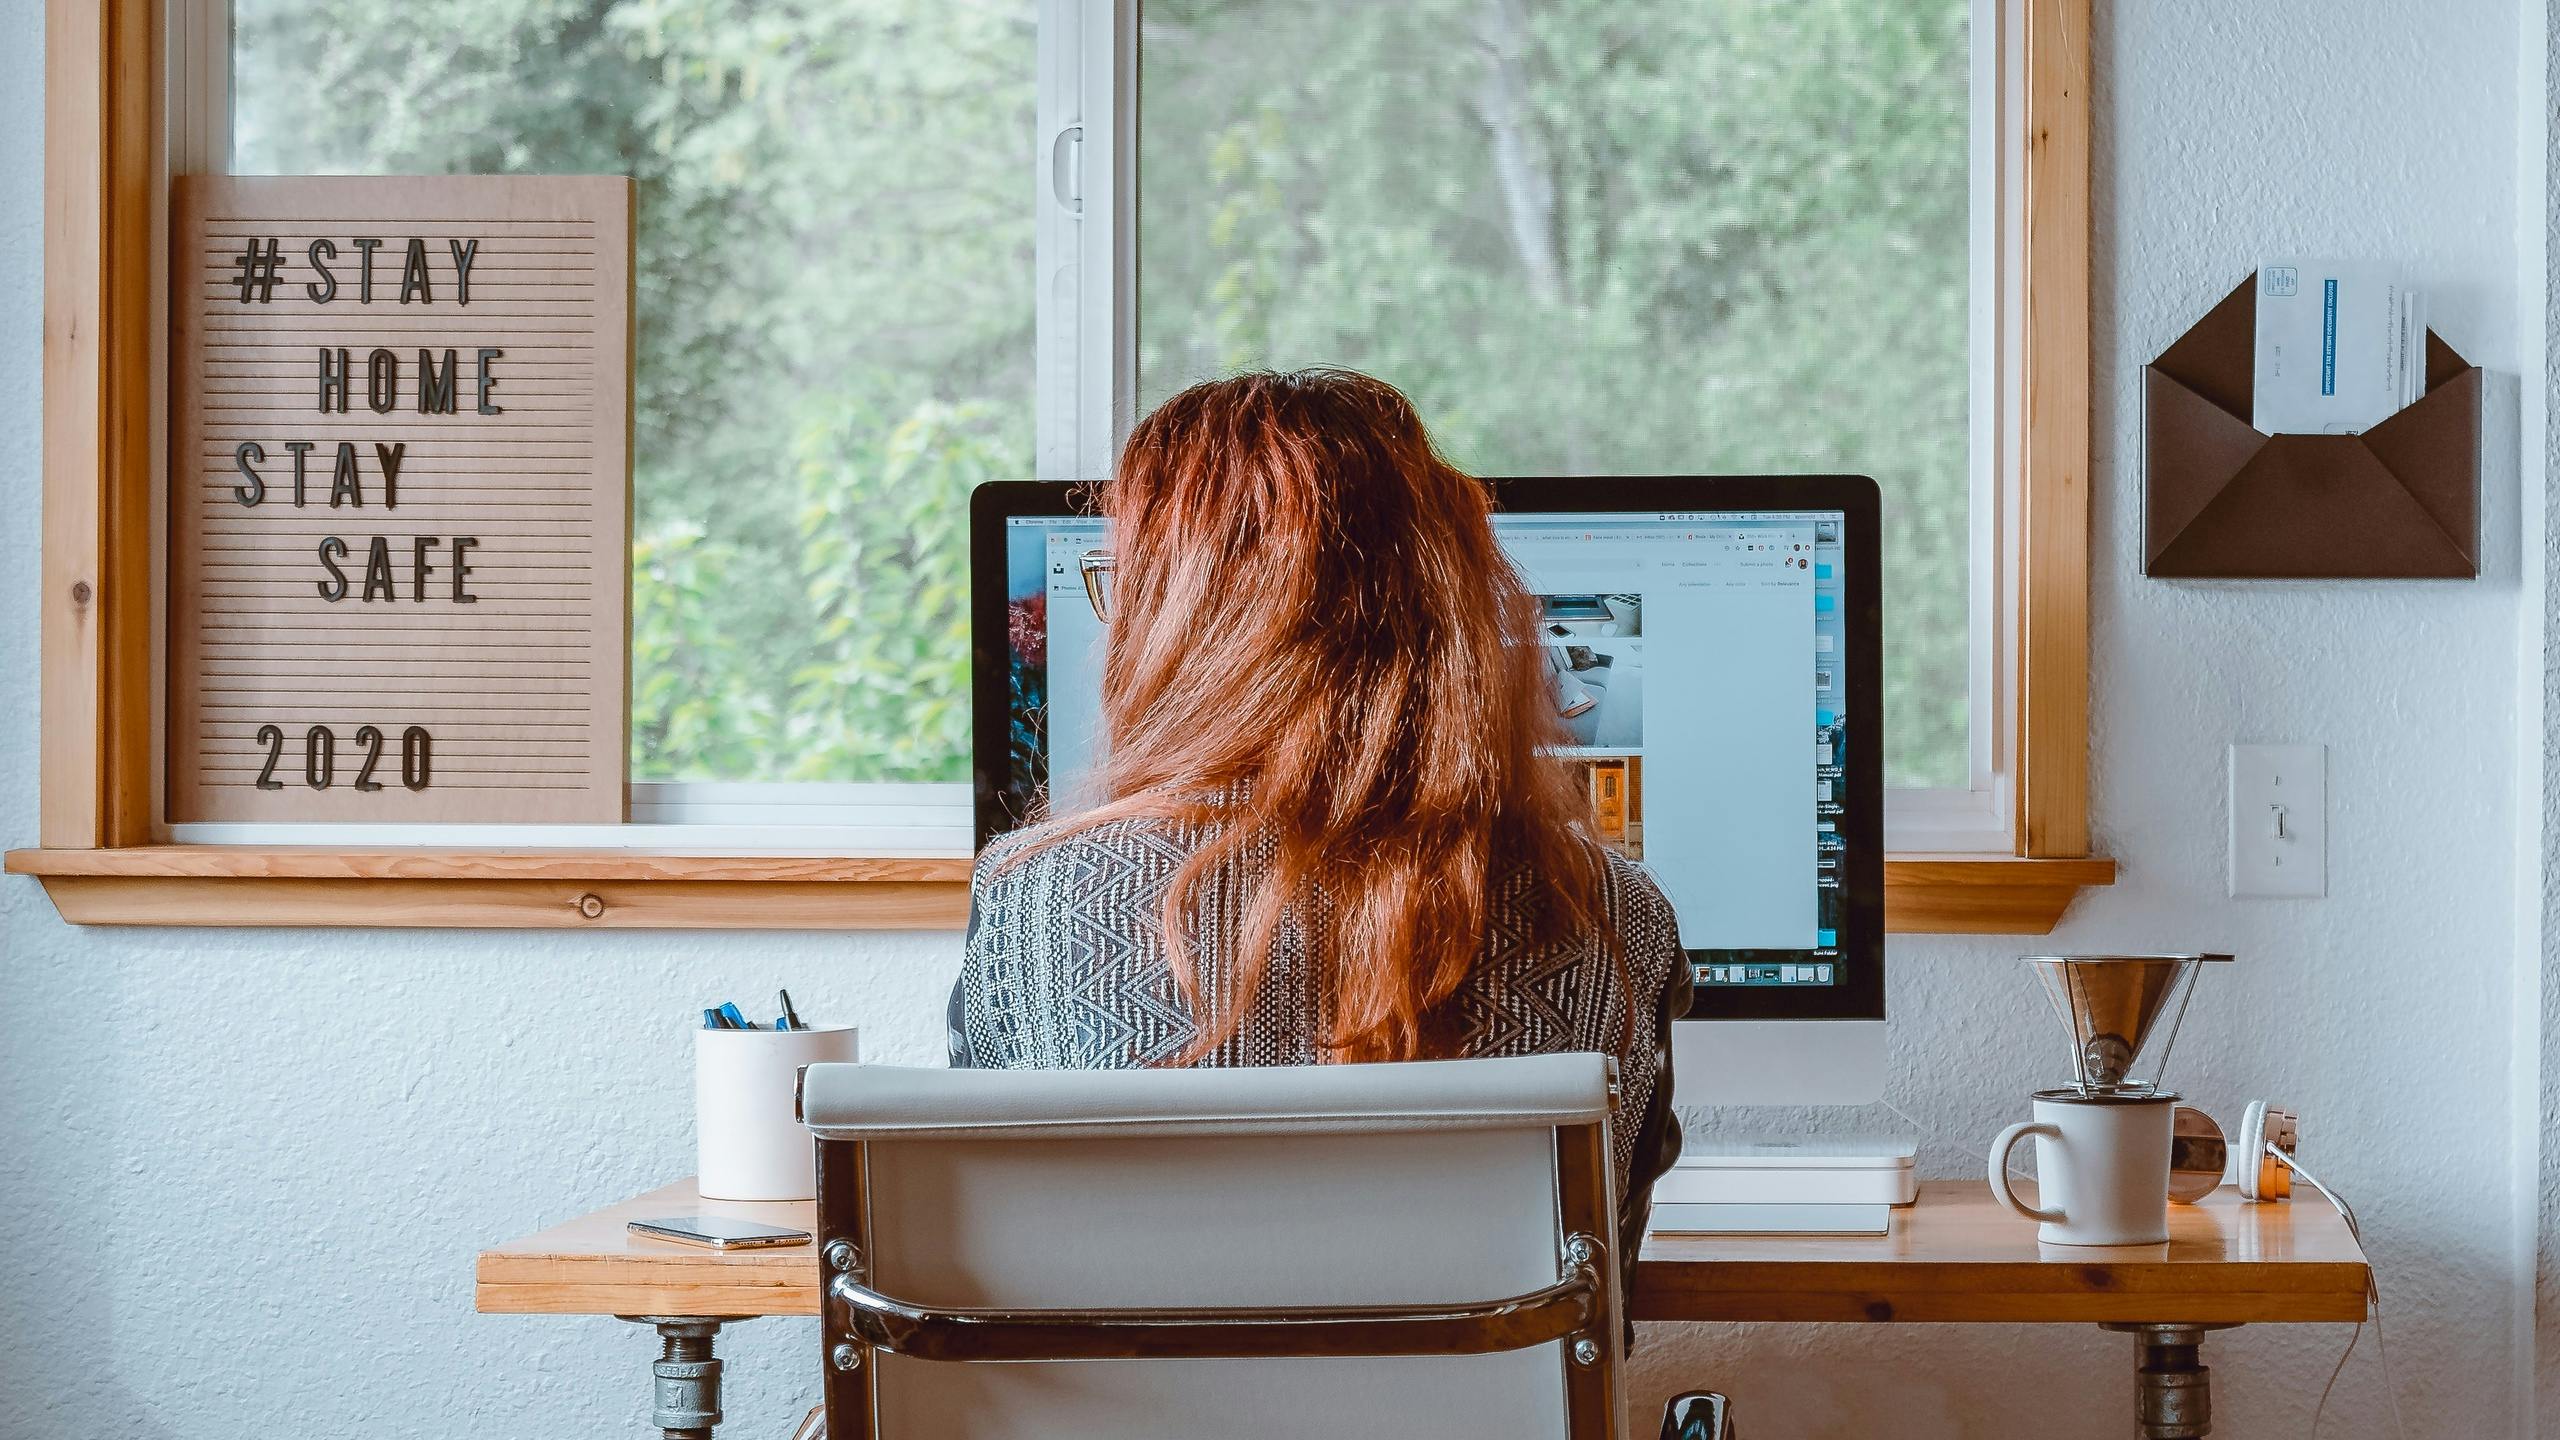 Woman working at computer in home office